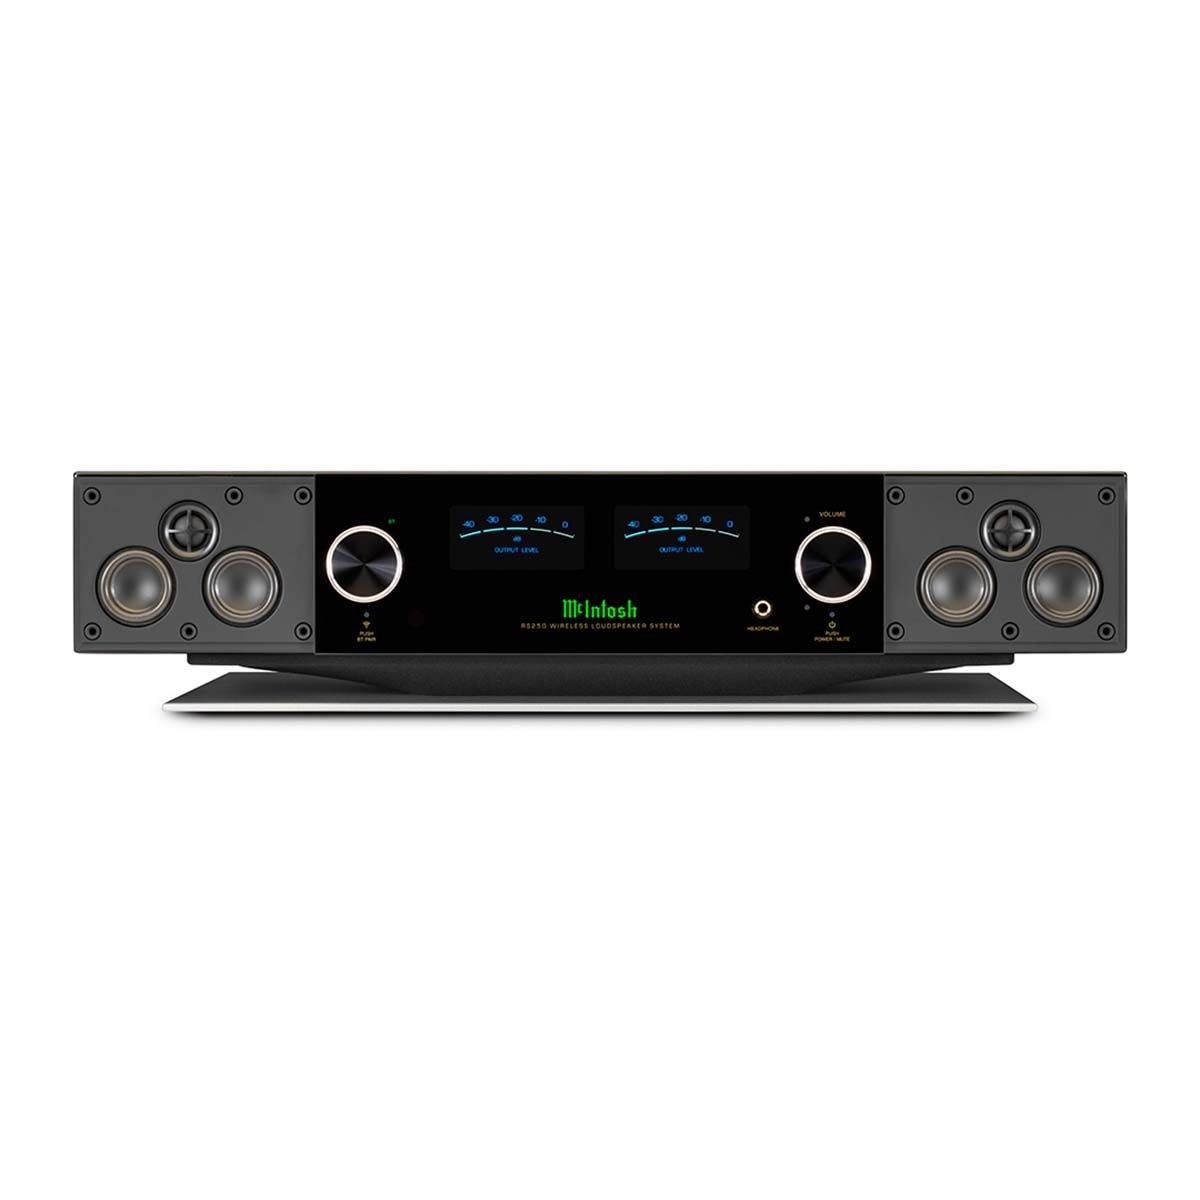 McIntosh RS250 Wireless Speaker, front view without grille